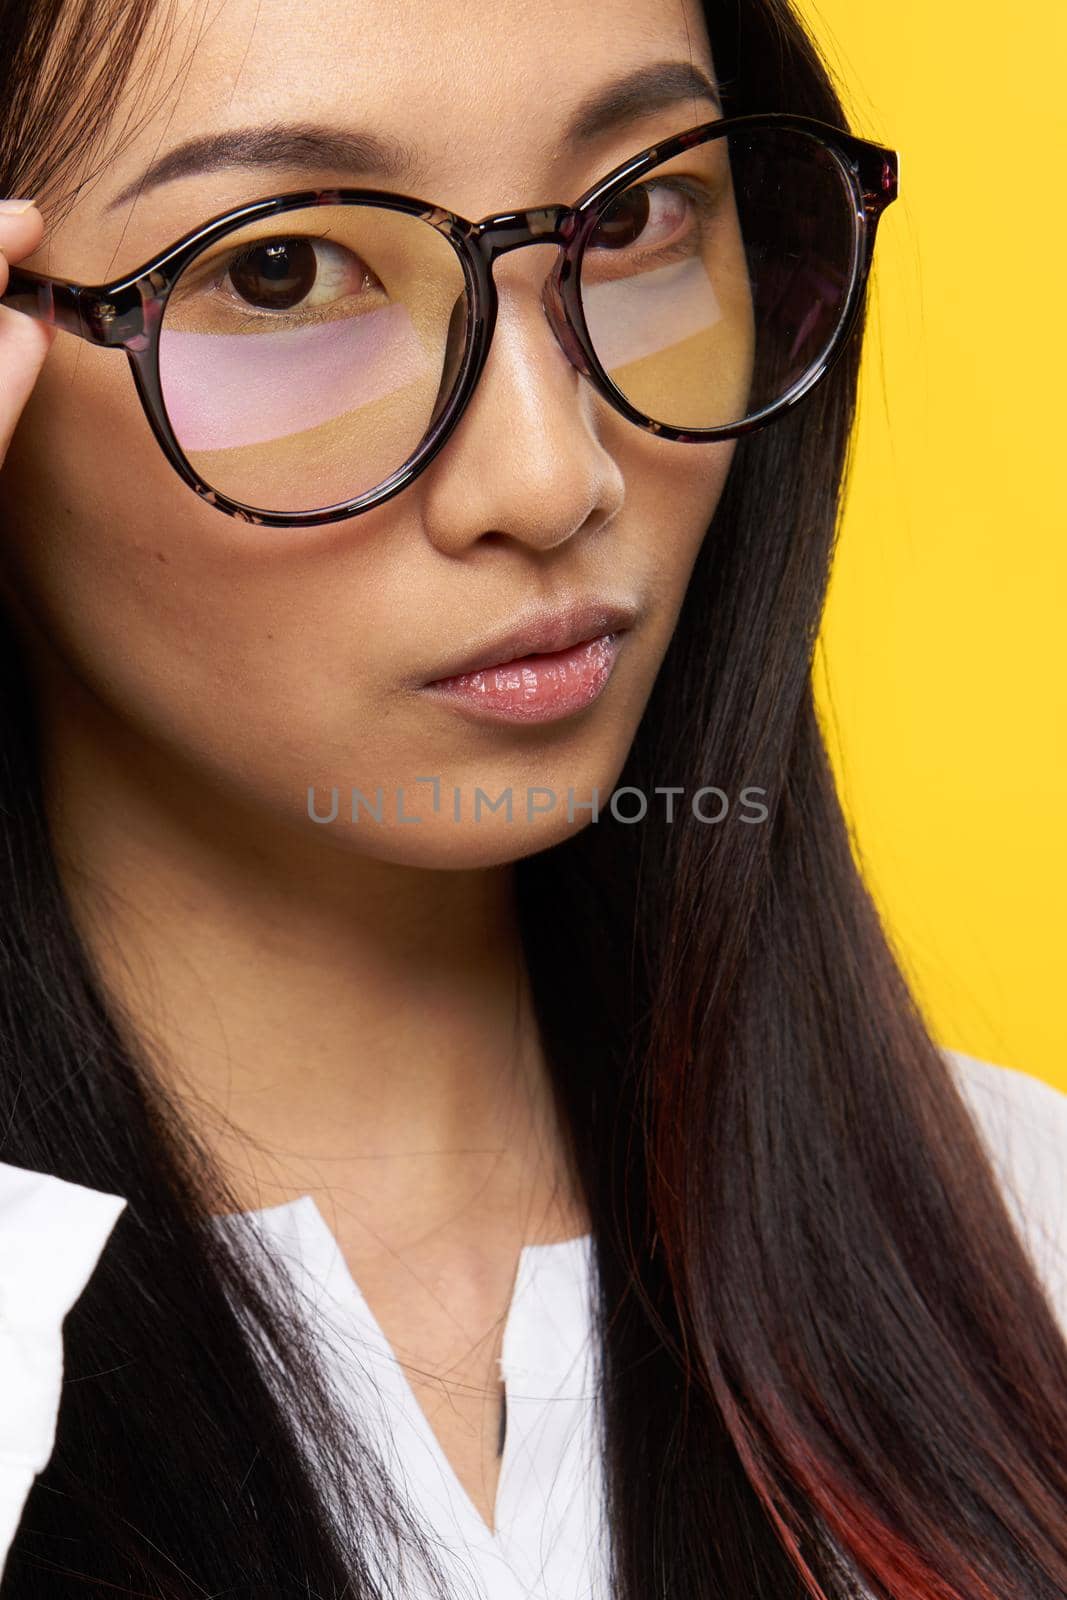 elegant woman of asian appearance with glasses close-up attractive look by SHOTPRIME